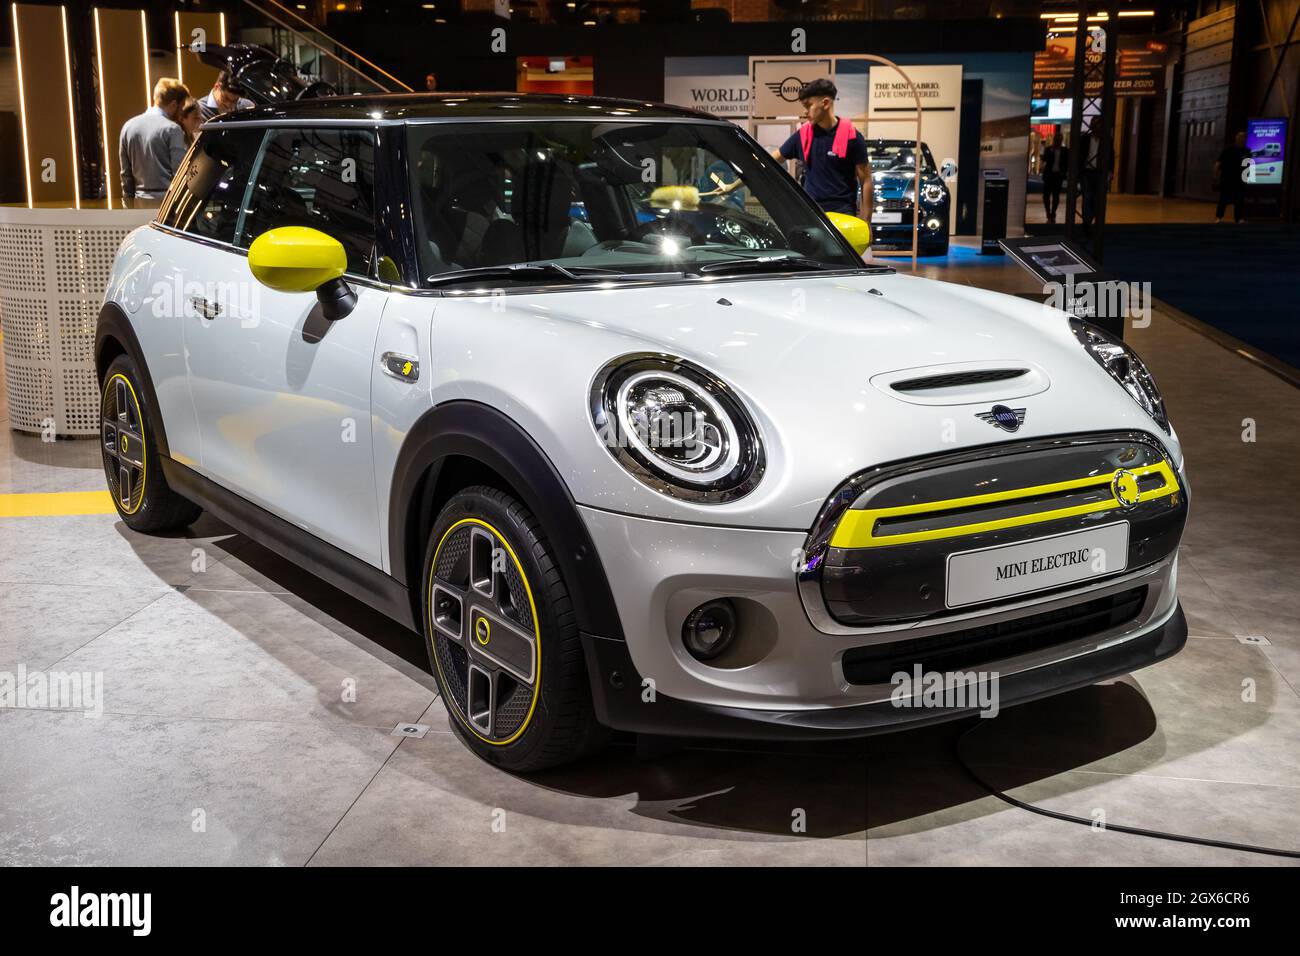 Mini Cooper Electric car showcased at the Autosalon 2020 Motor Show. Brussels, Belgium - January 9, 2020. Stock Photo